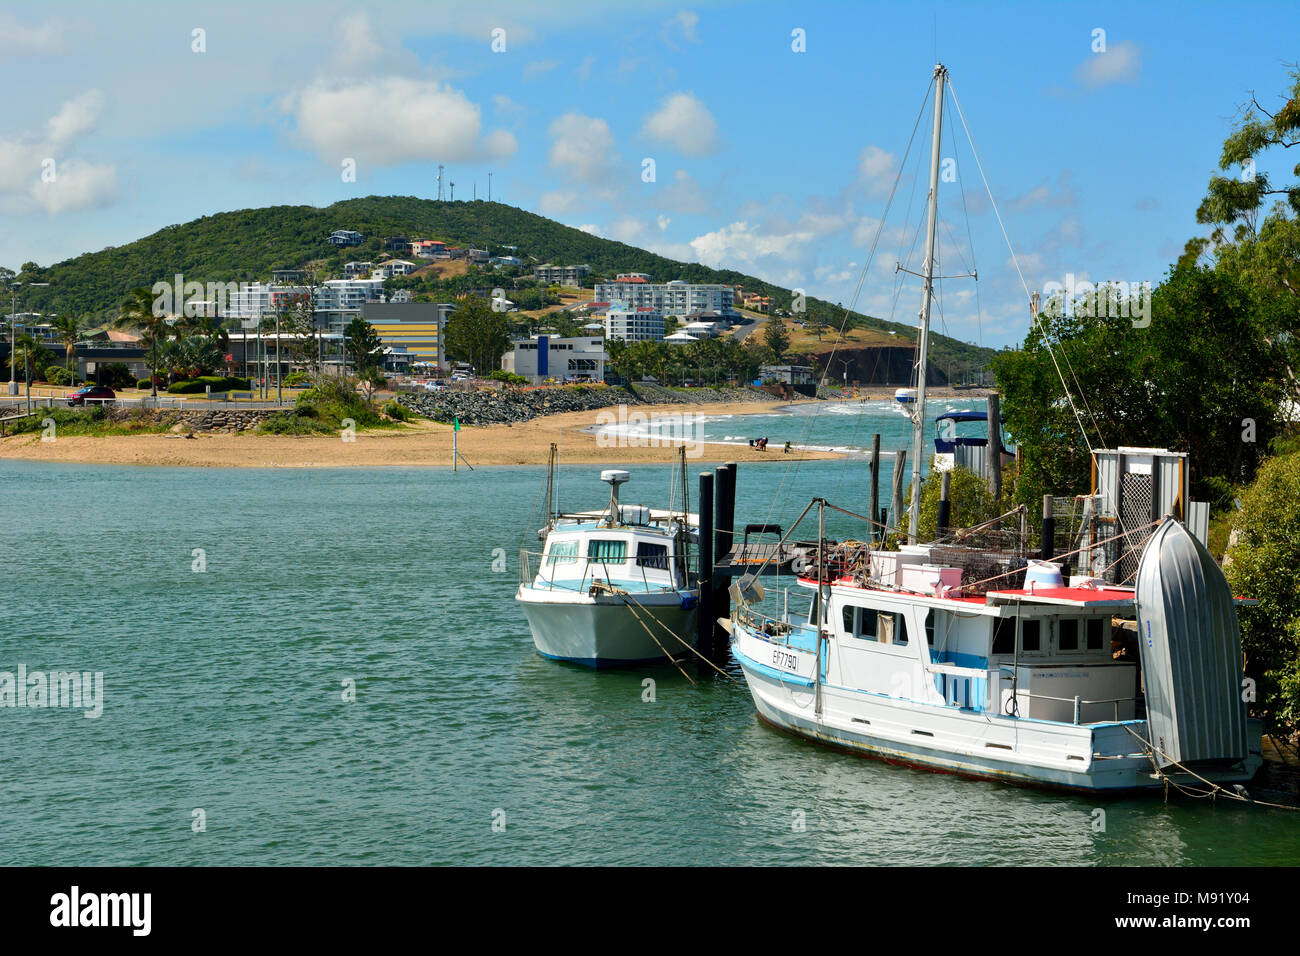 Yeppoon, Queensland, Australia - December 27, 2017. View toward Yeppoon town and beach with boats. Stock Photo